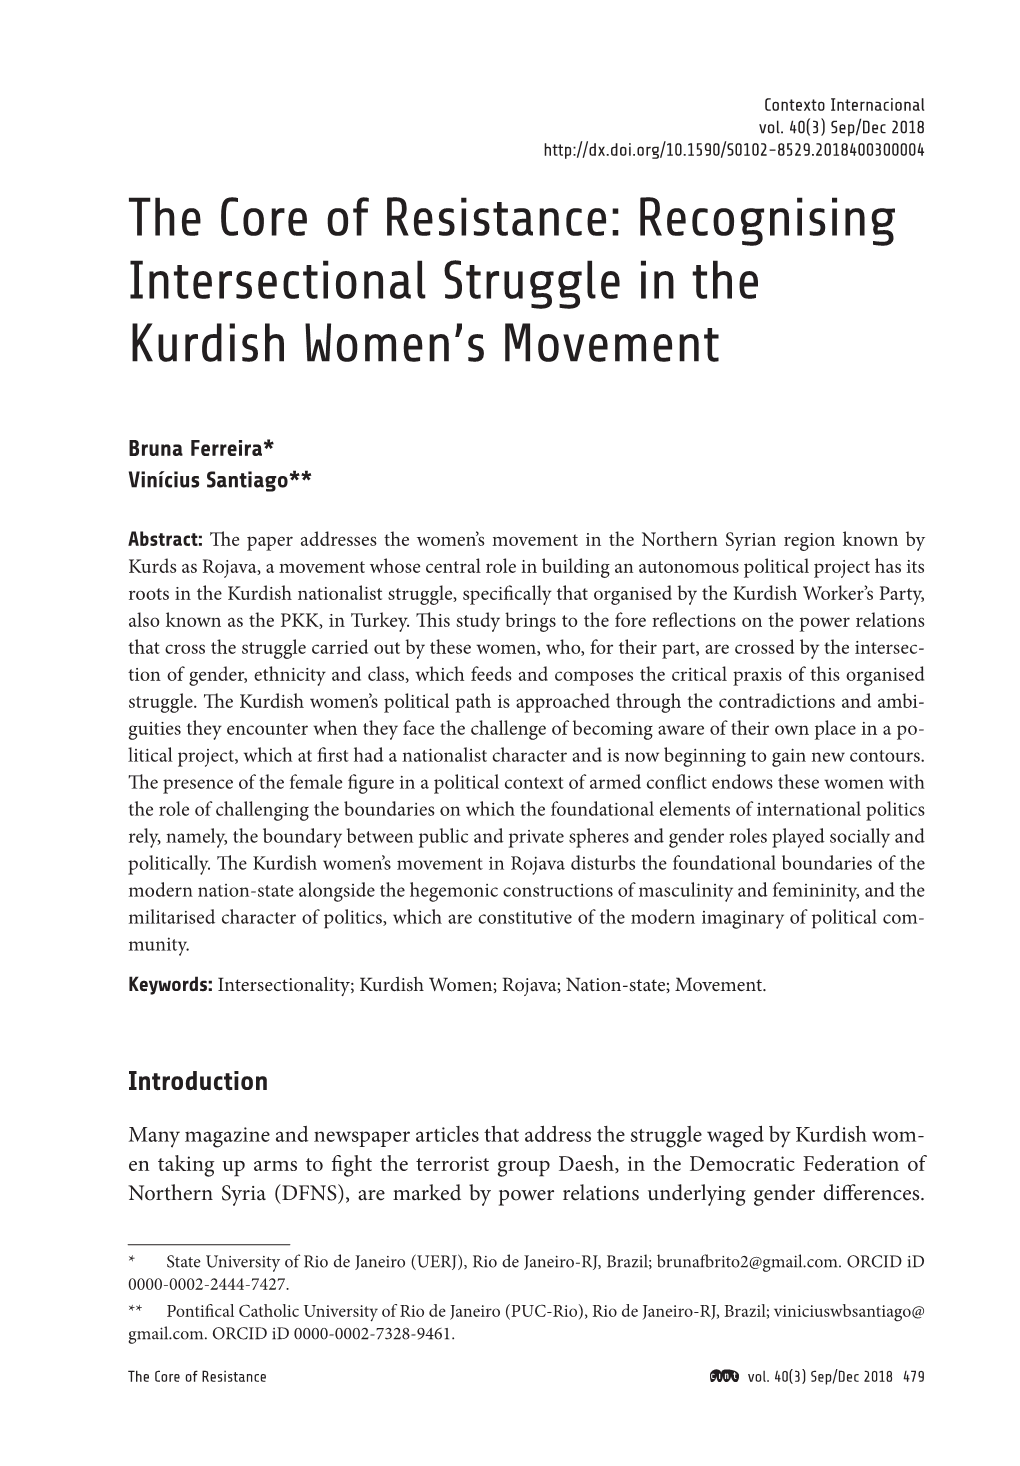 Recognising Intersectional Struggle in the Kurdish Women's